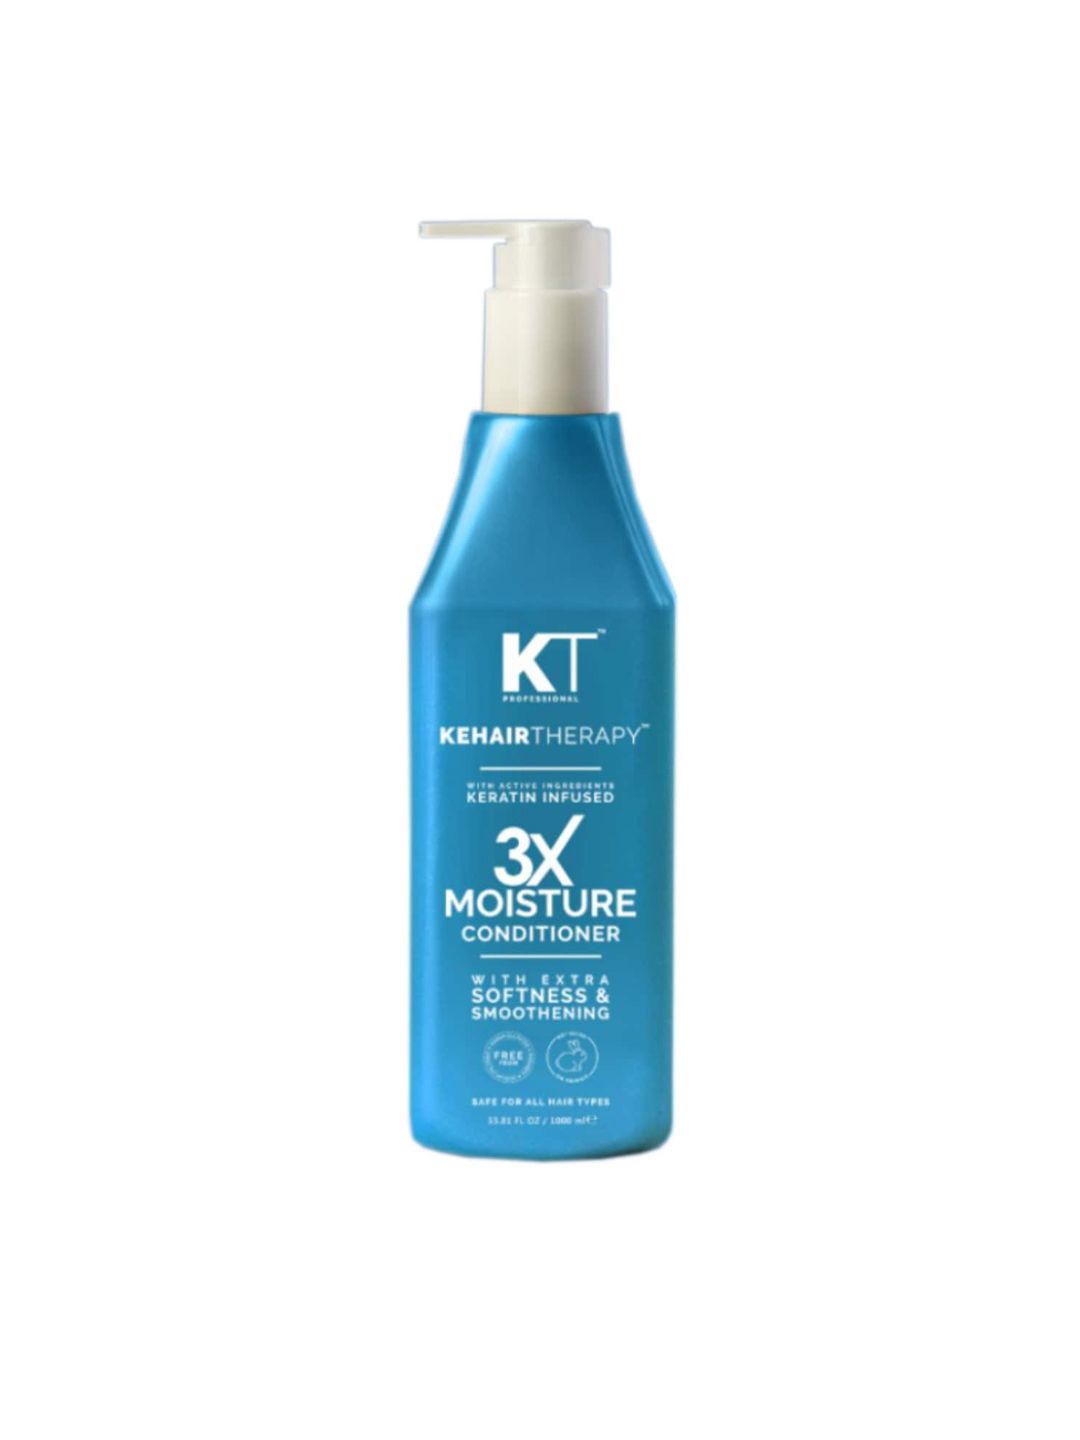 KEHAIRTHERAPY Keratin Infused 3X Moisture Hair Conditioner with Extra Softness - 1000 ml Price in India